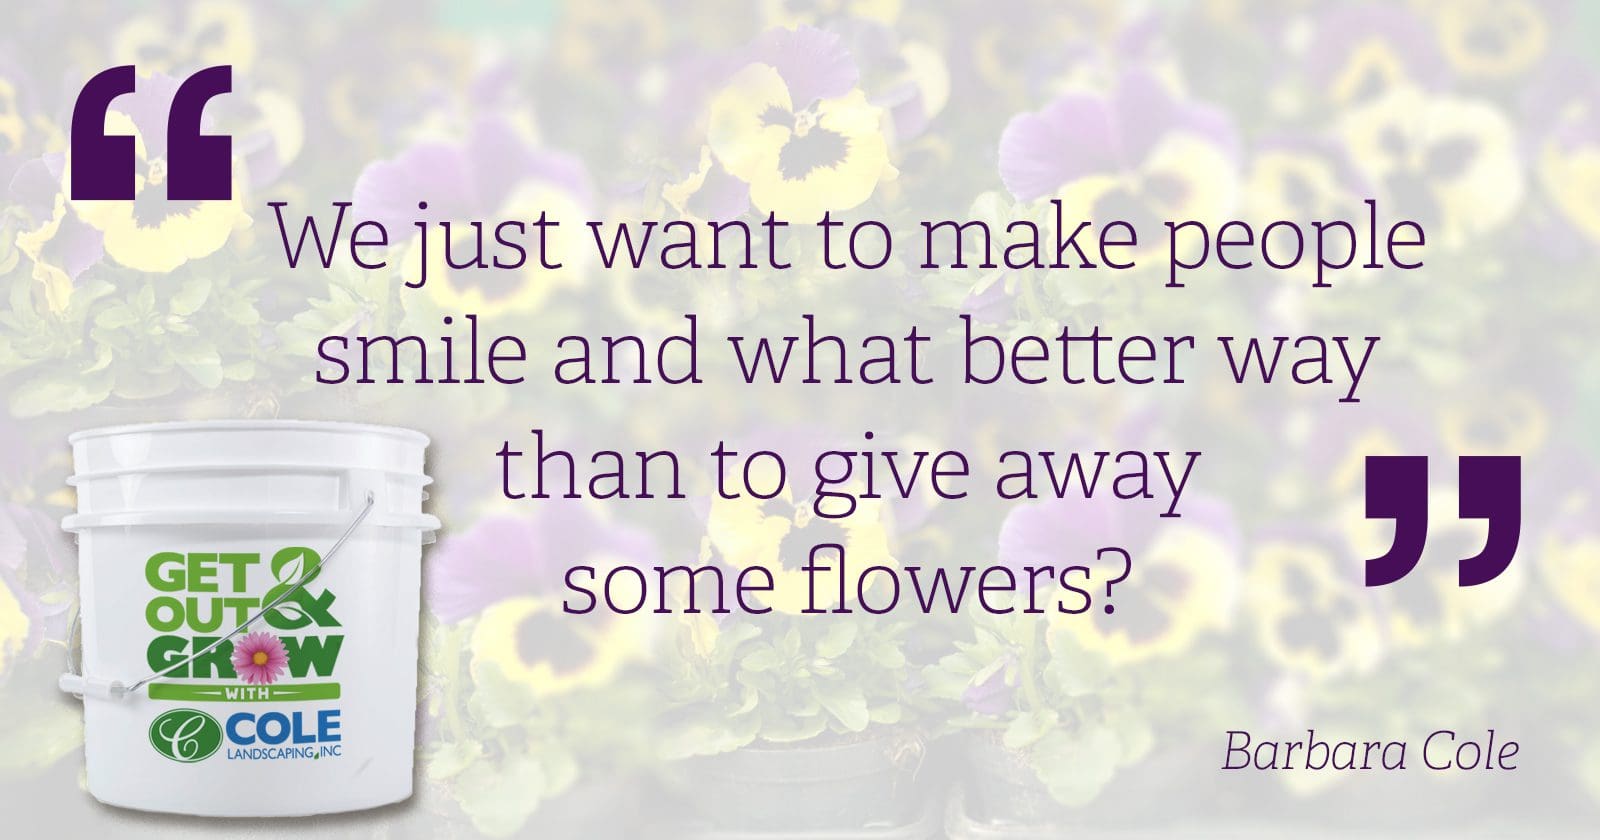 We just want to make people smile and what better way than to give away flowers?